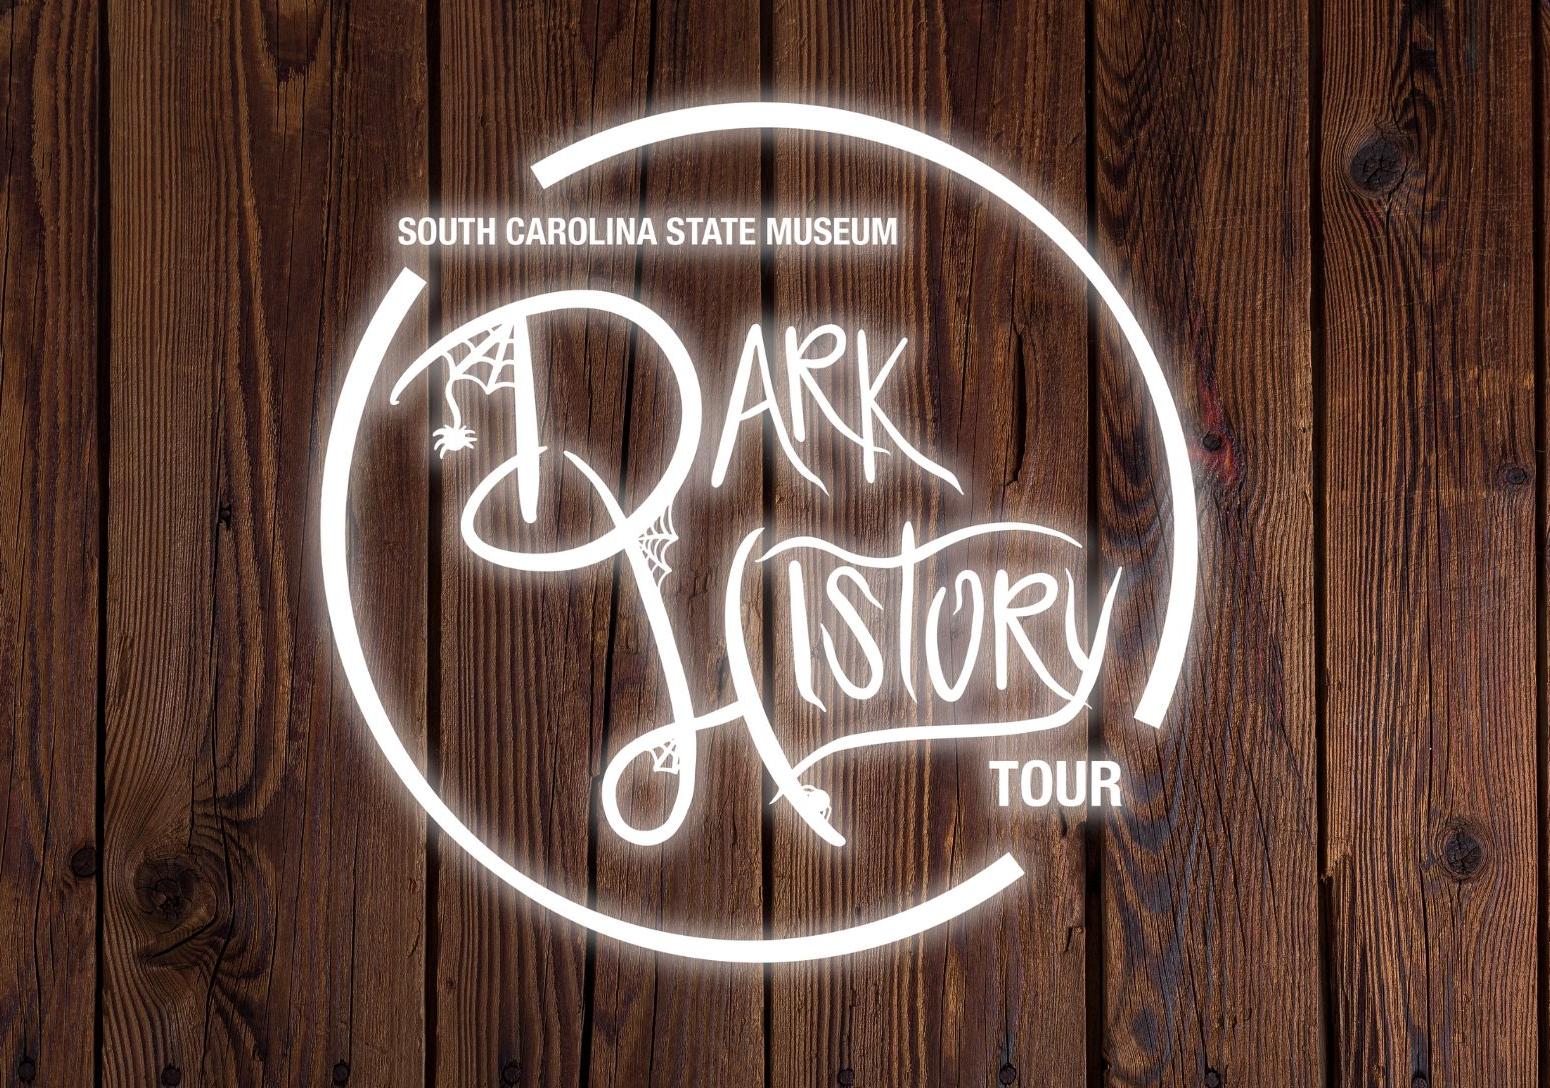 Round logo that reads Dark History History Tours in light text on a dark brown background